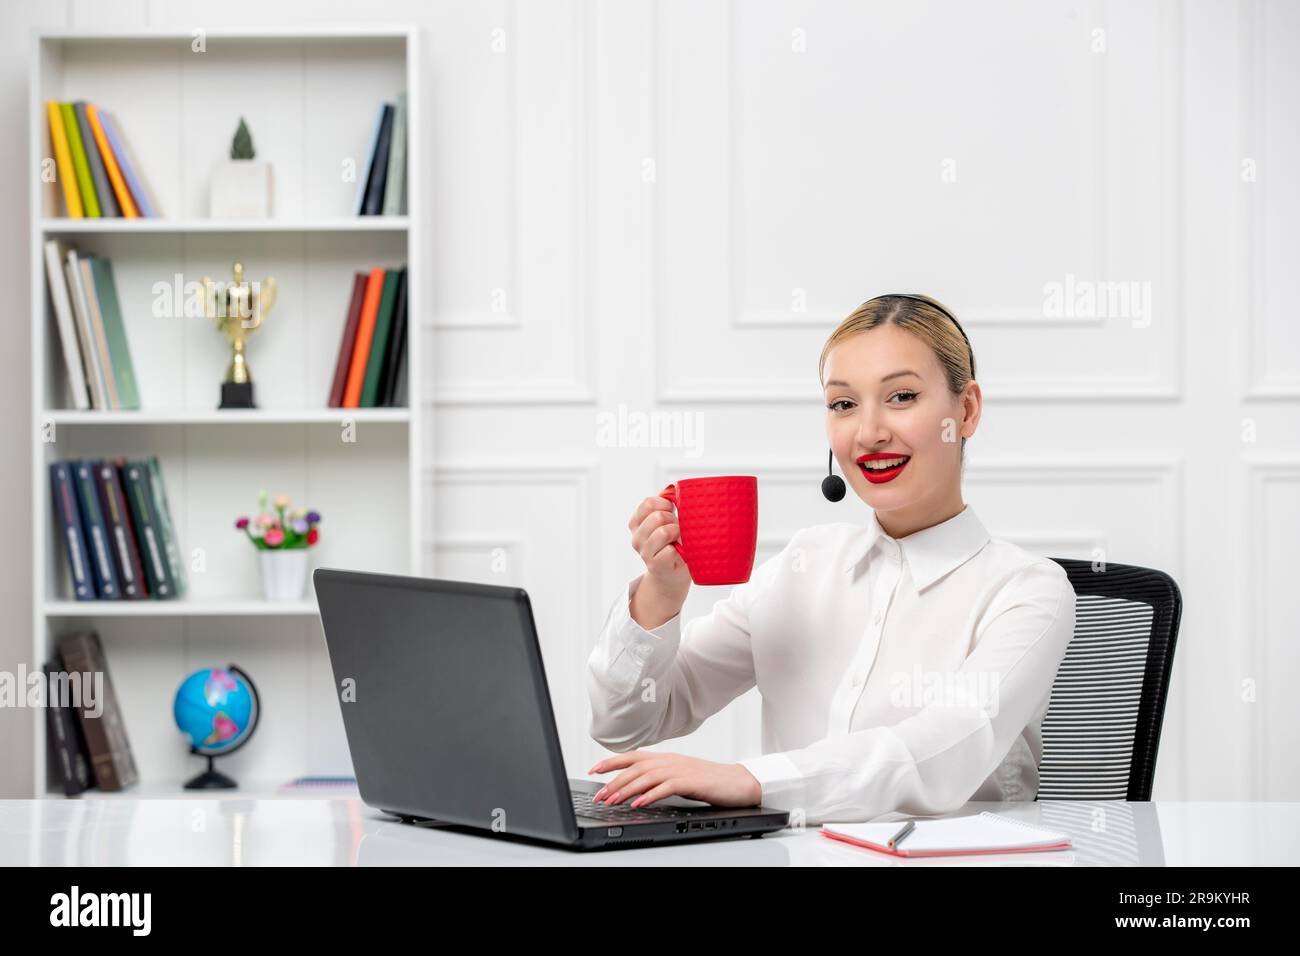 customer service cute blonde girl office shirt with headset and computer holding red cup Stock Photo